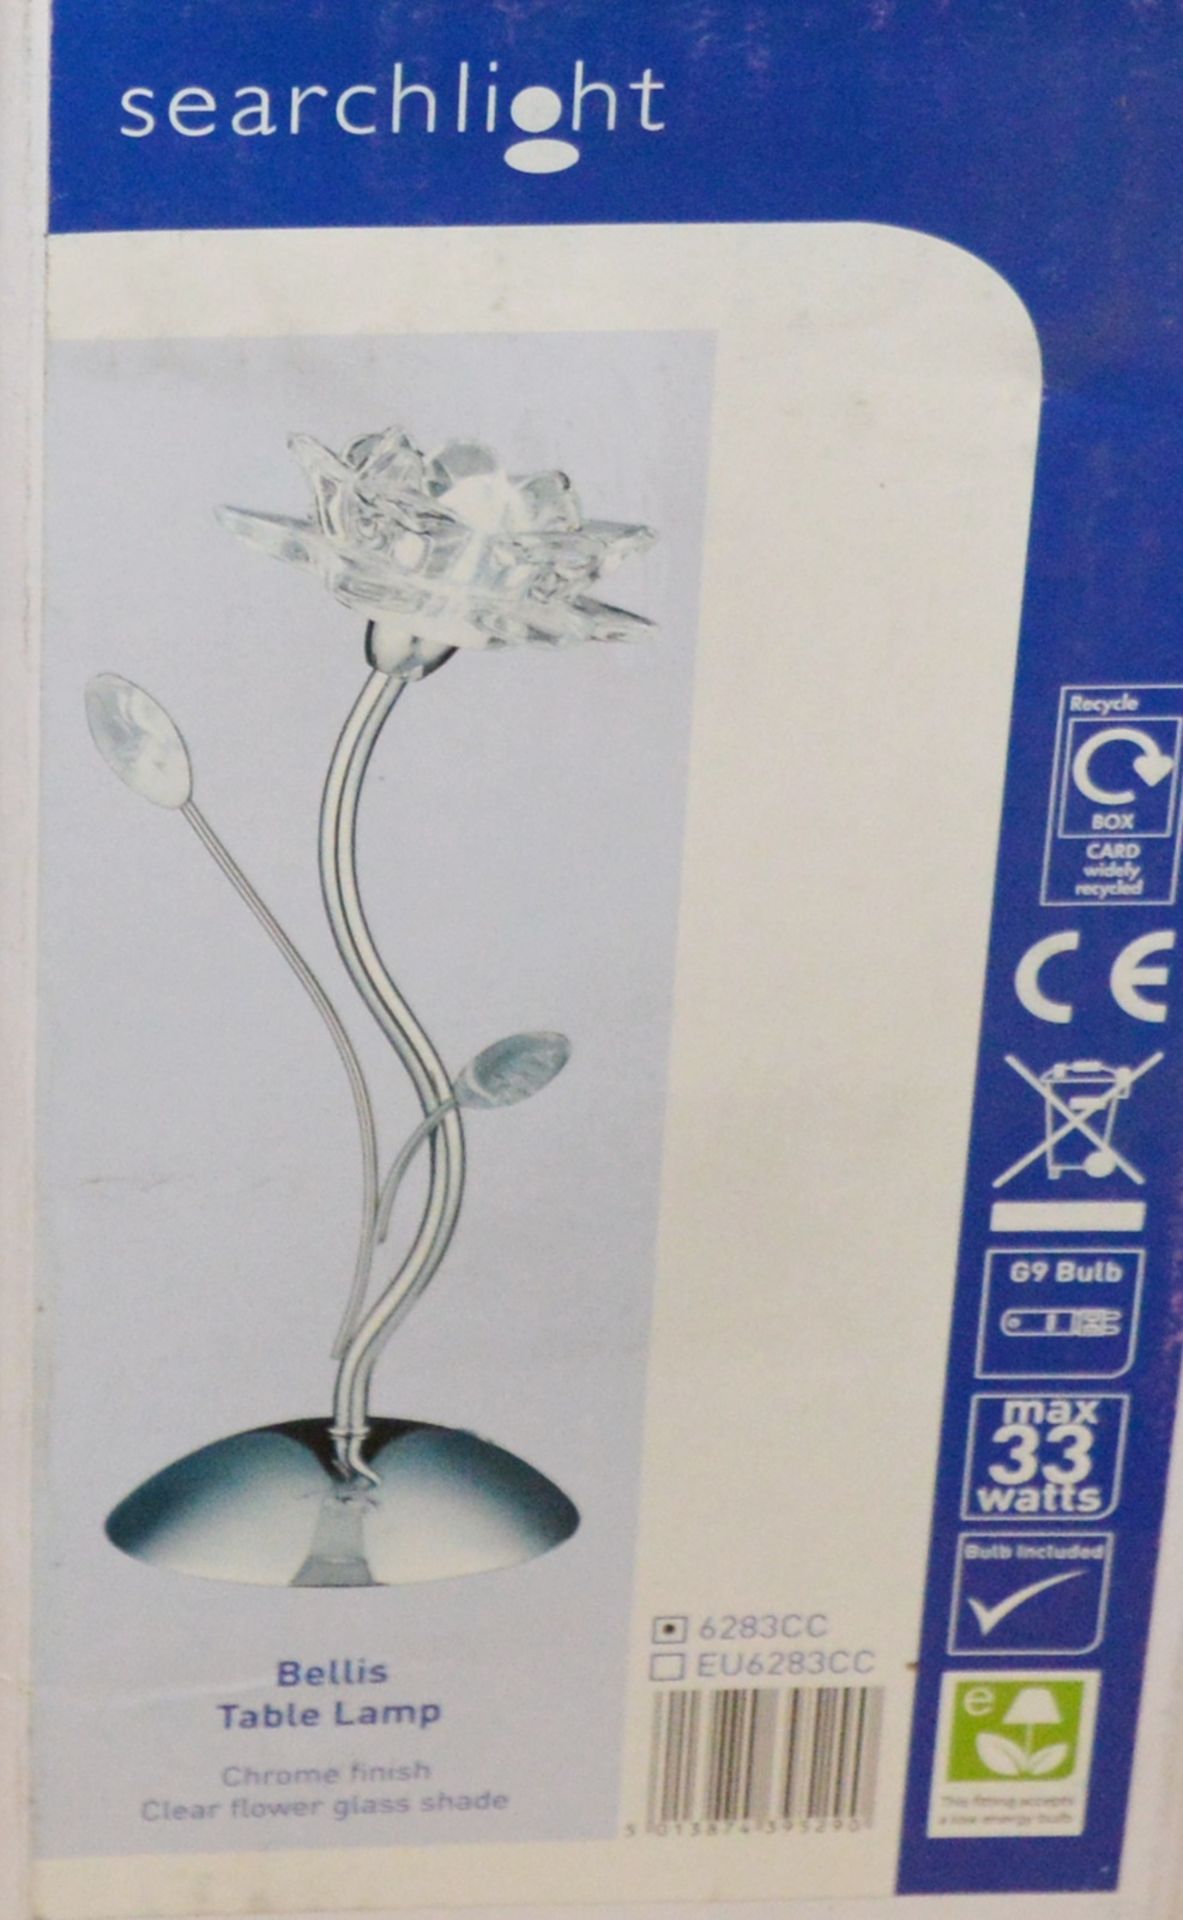 2 x Searchlight Bellis Table Lamps With Chrome Finish and Clear Flower Glass Shades - Product Code - Image 2 of 2